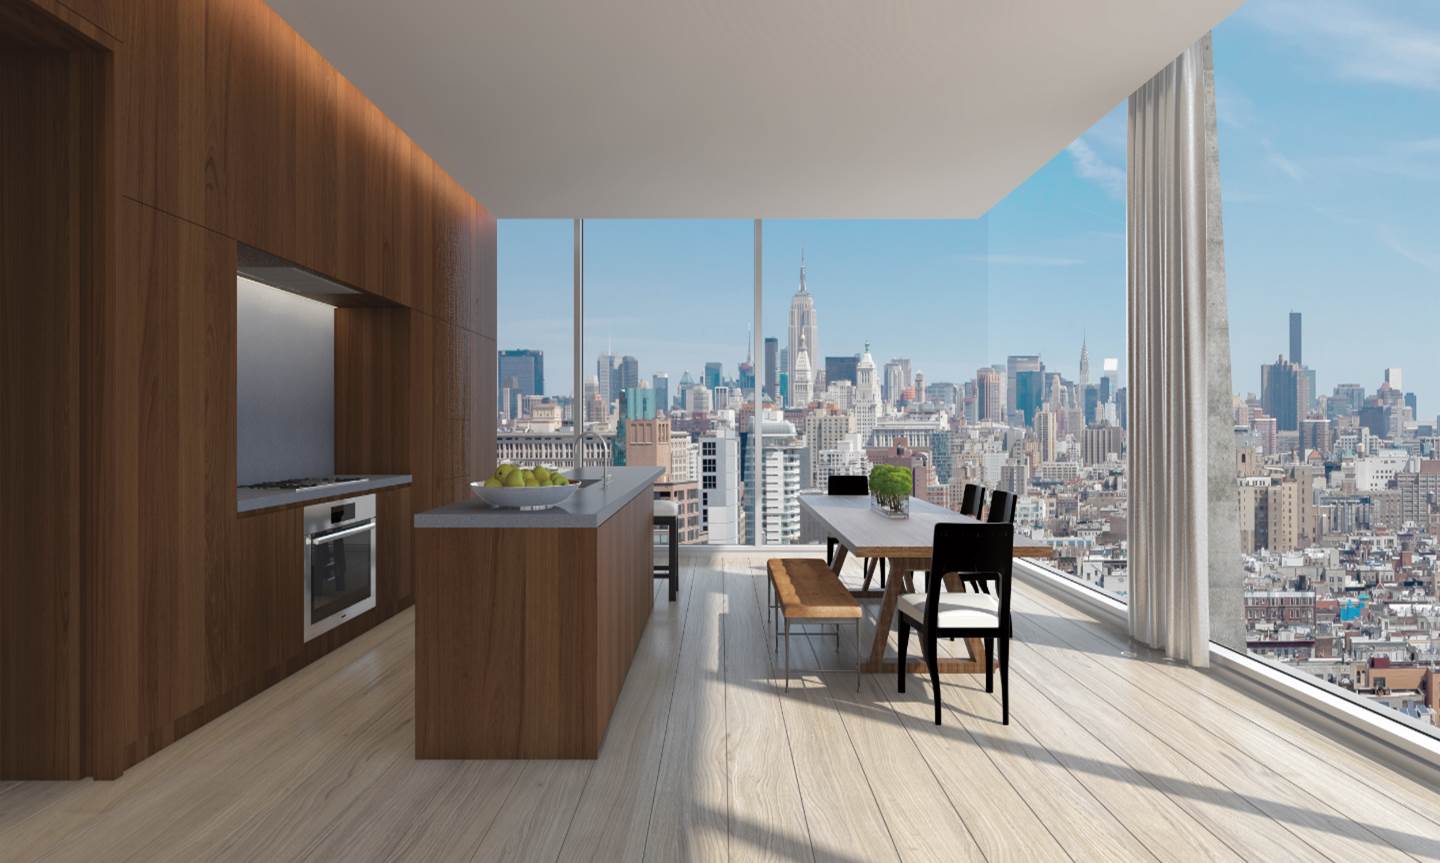 An interior rendering for 215 Chrystie